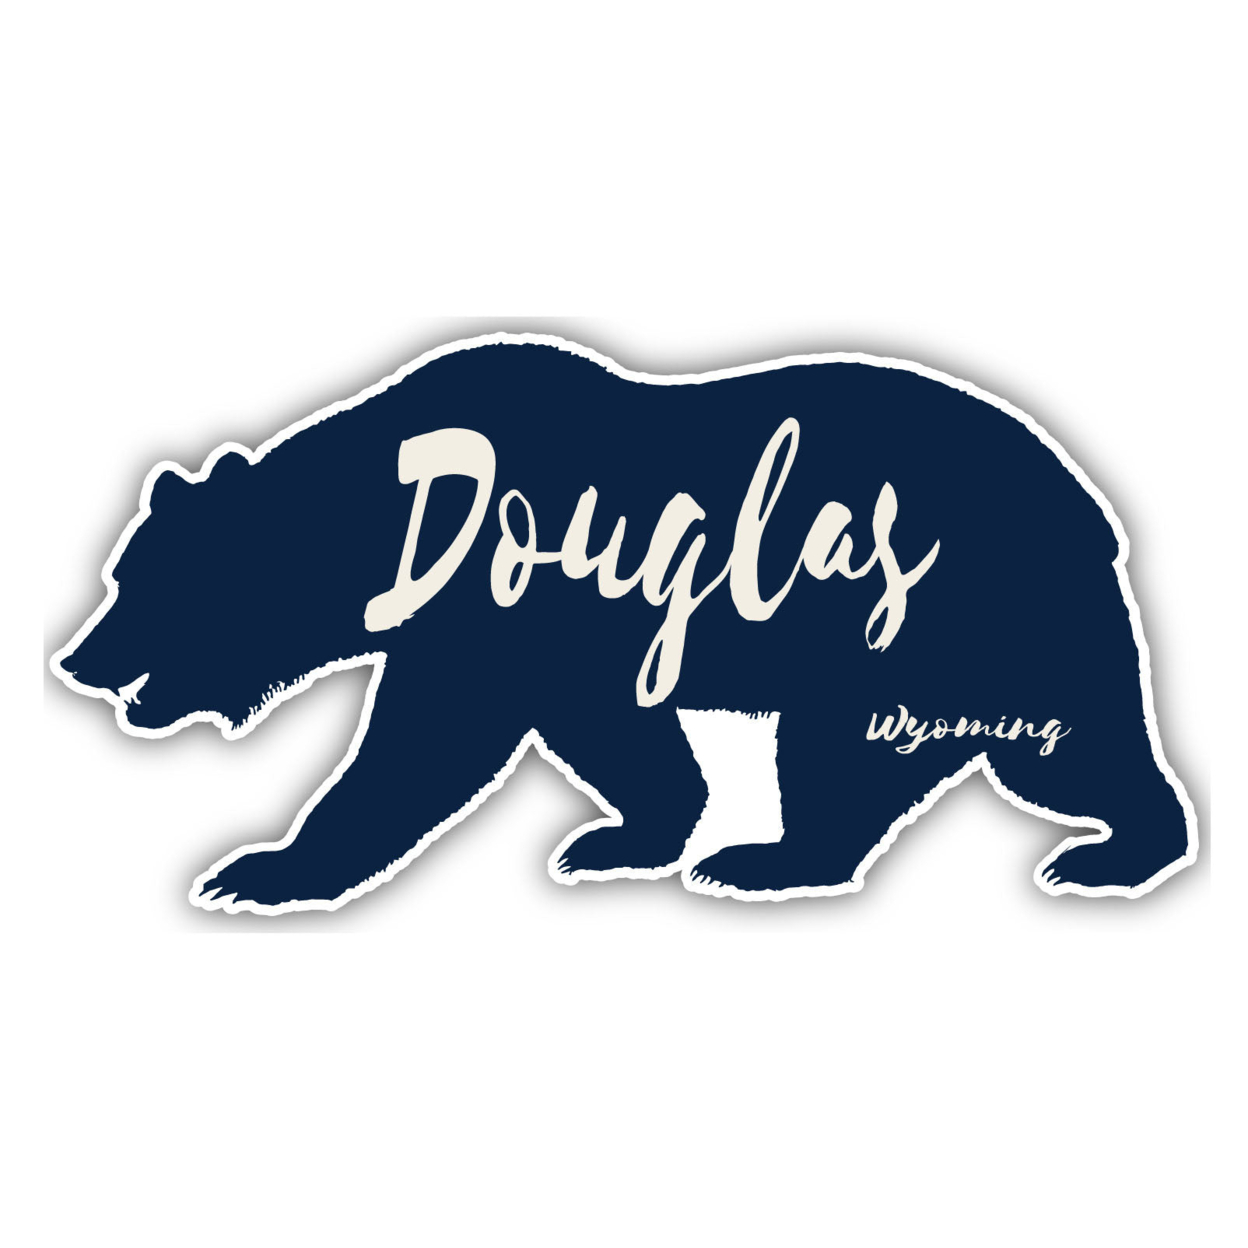 Douglas Wyoming Souvenir Decorative Stickers (Choose Theme And Size) - 4-Pack, 4-Inch, Great Outdoors